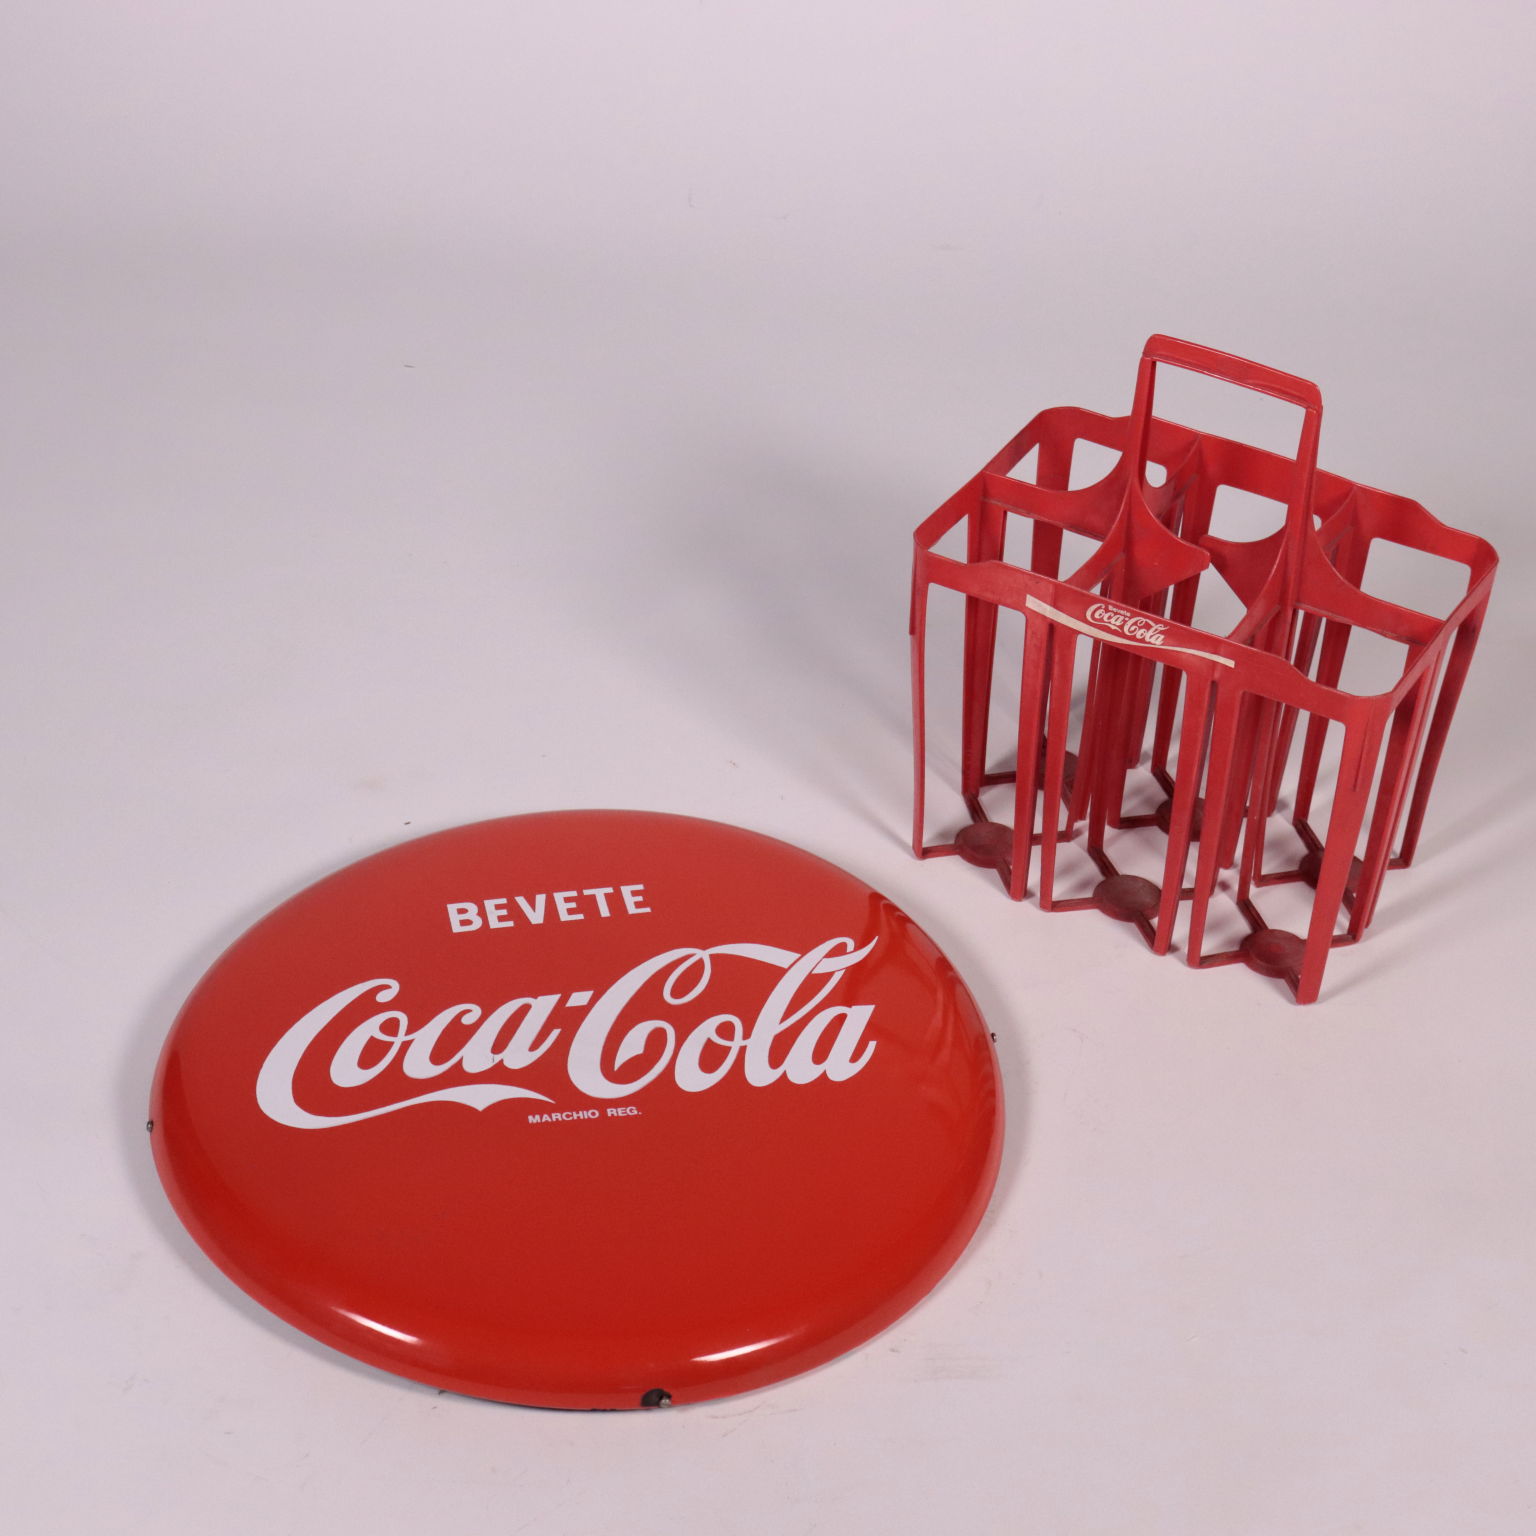 modern antiques, modern design antiques, objects, modern antiques objects, modern antiques objects, Italian objects, vintage objects, 1960s objects, 1960s design objects, Coca Cola objects, Coca Cola 1980s objects